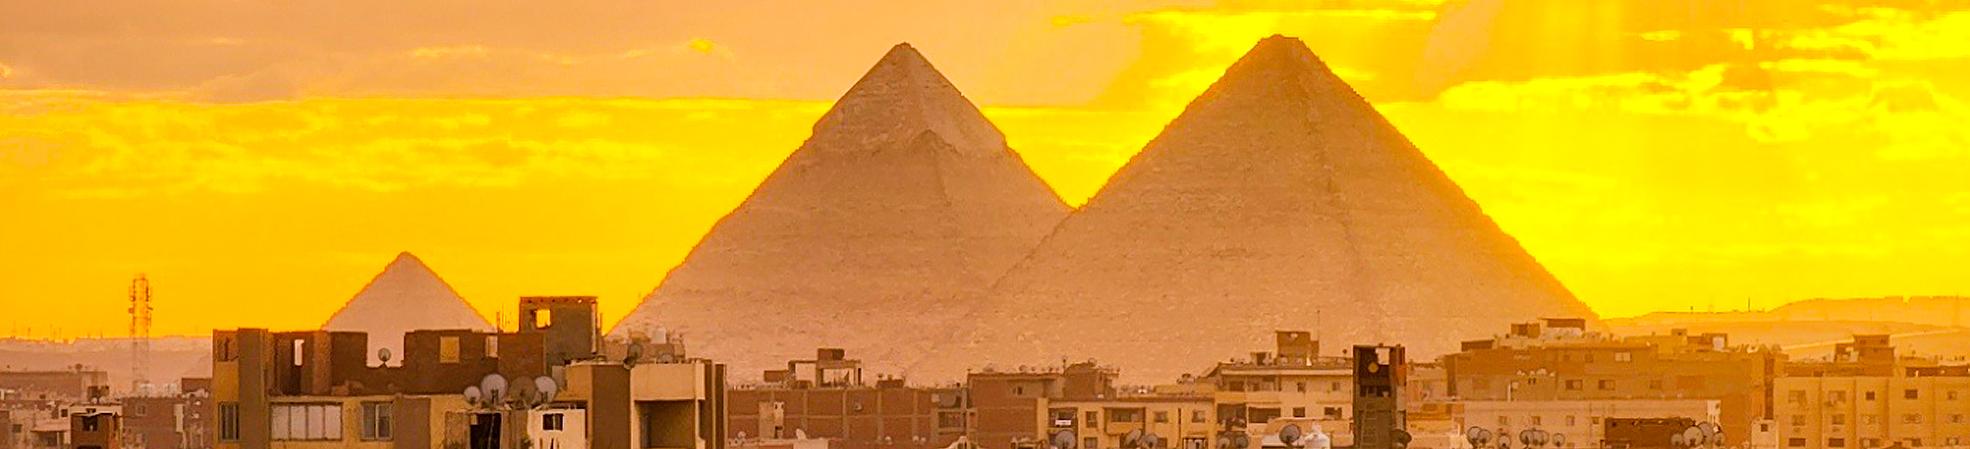 9 of the Most Famous Egyptian Pyramids to Visit